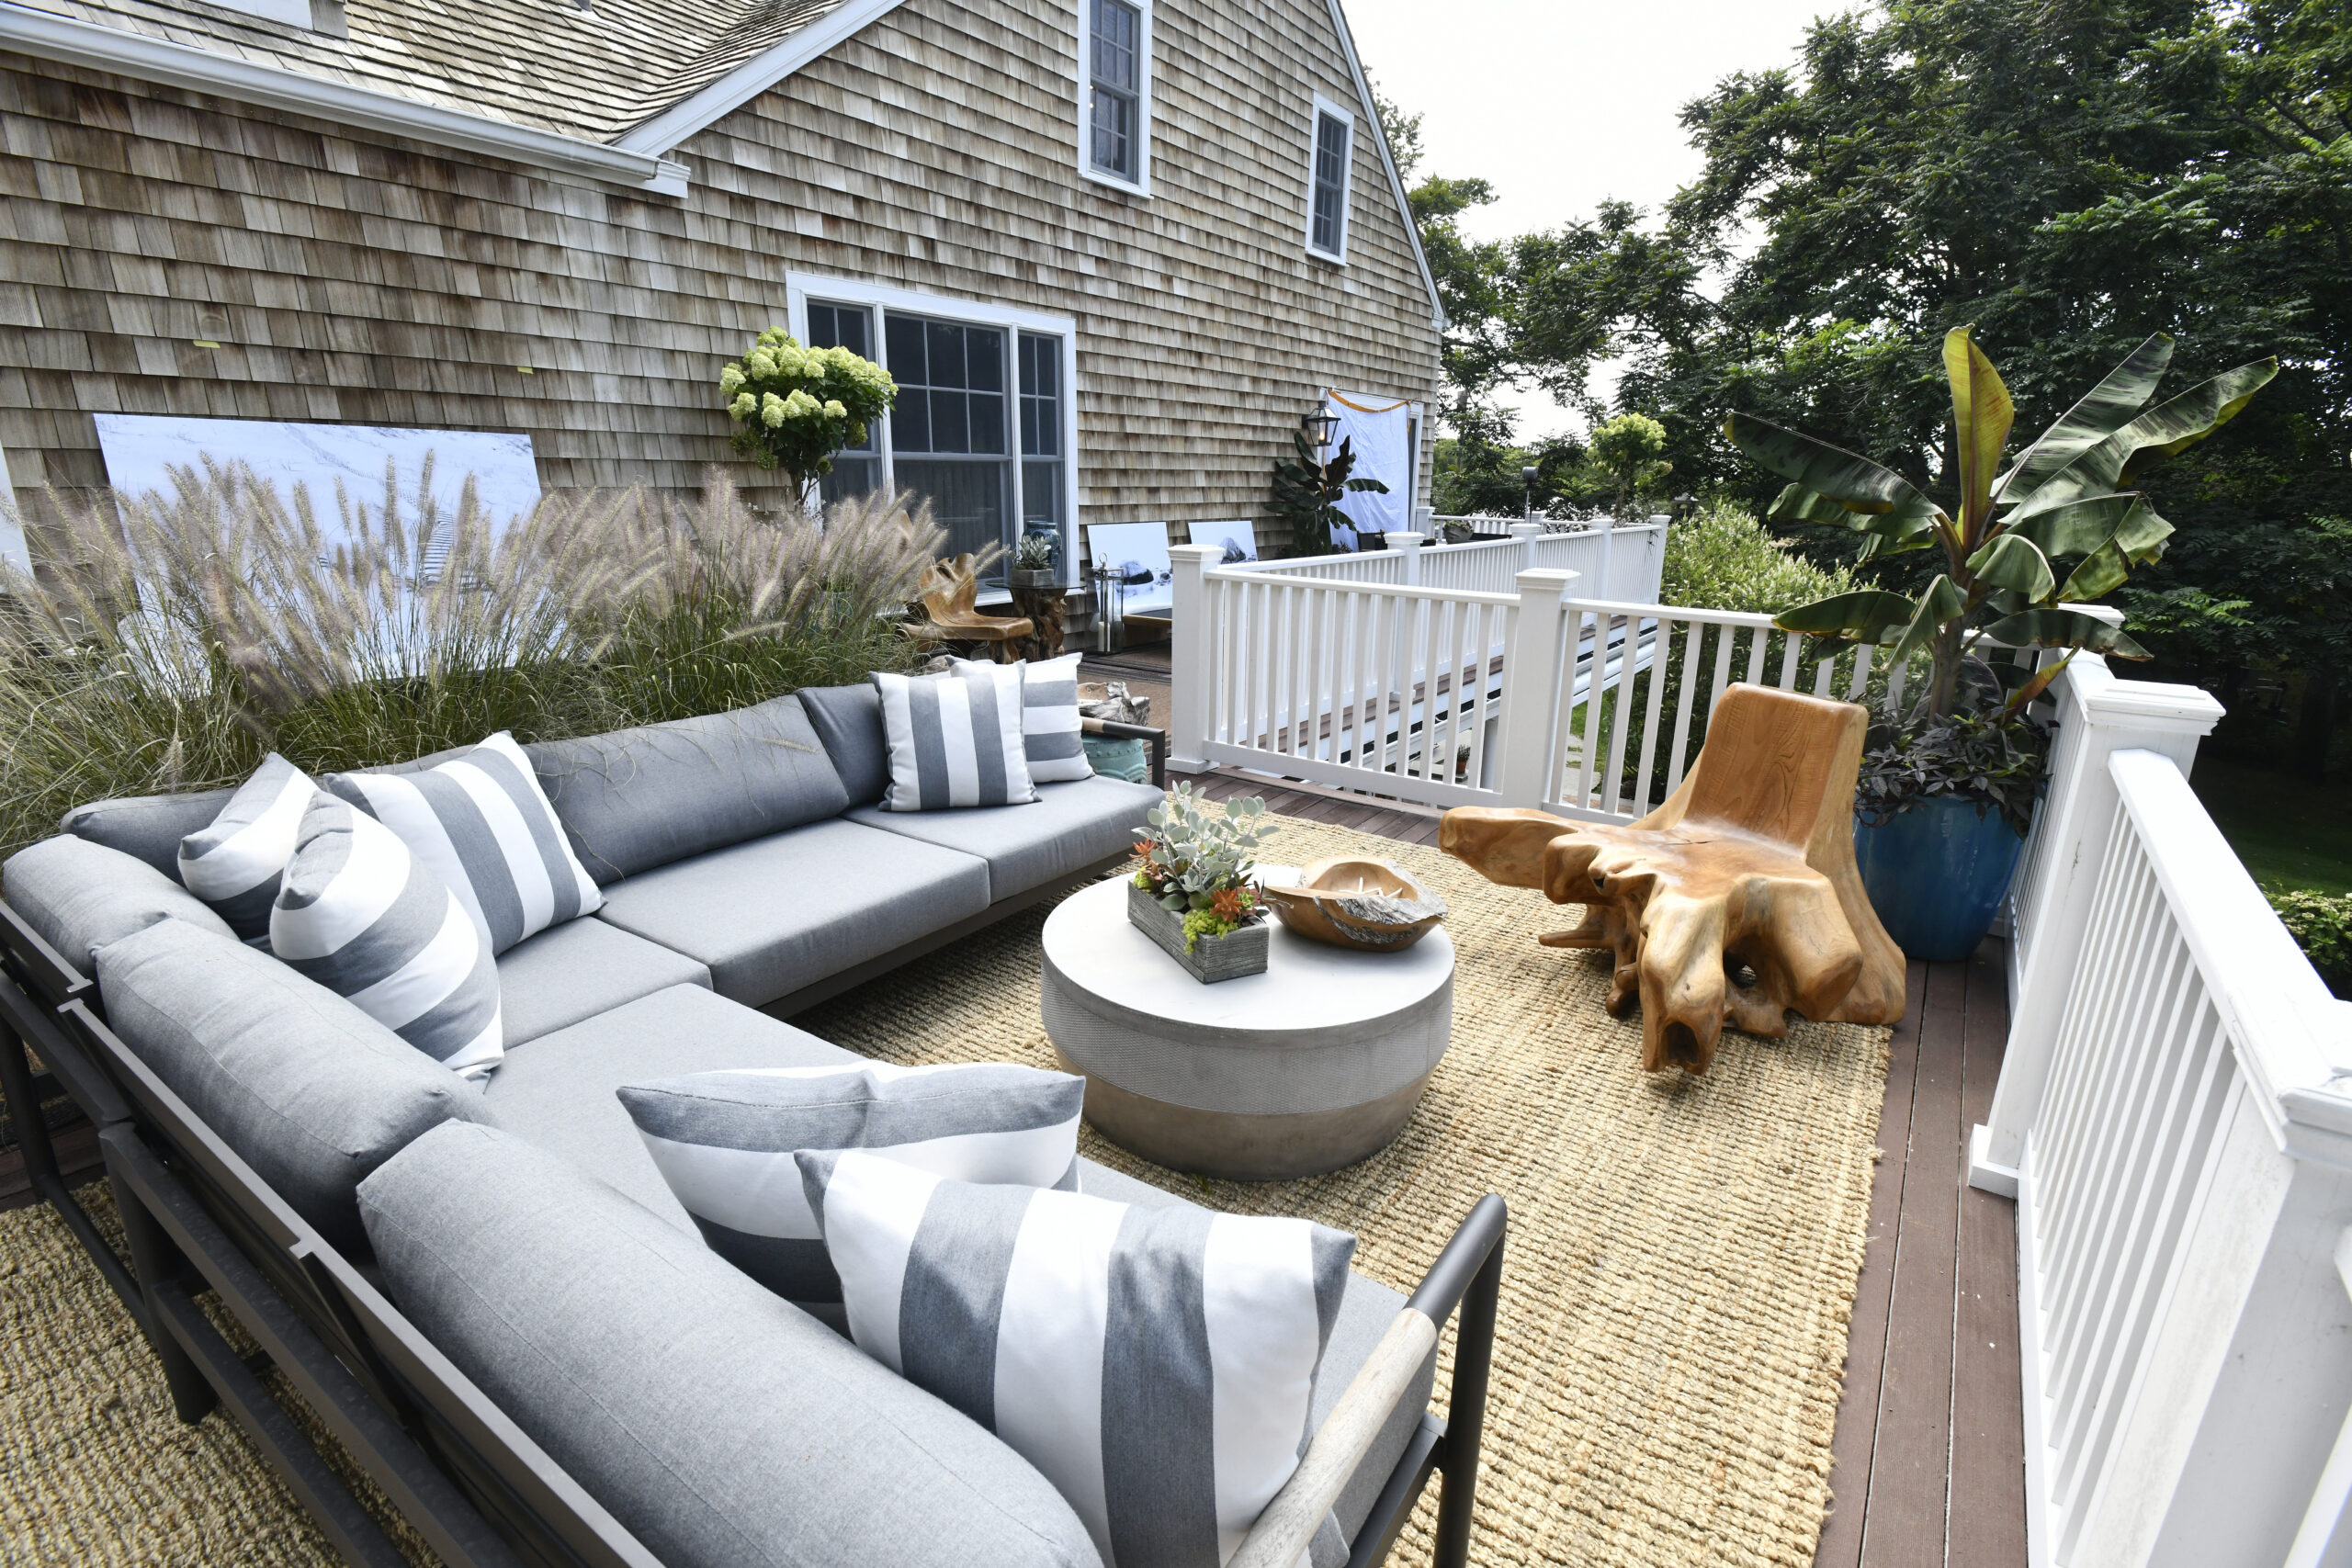 The deck off the bedroom designed by Tisha Collette.  DANA SHAW